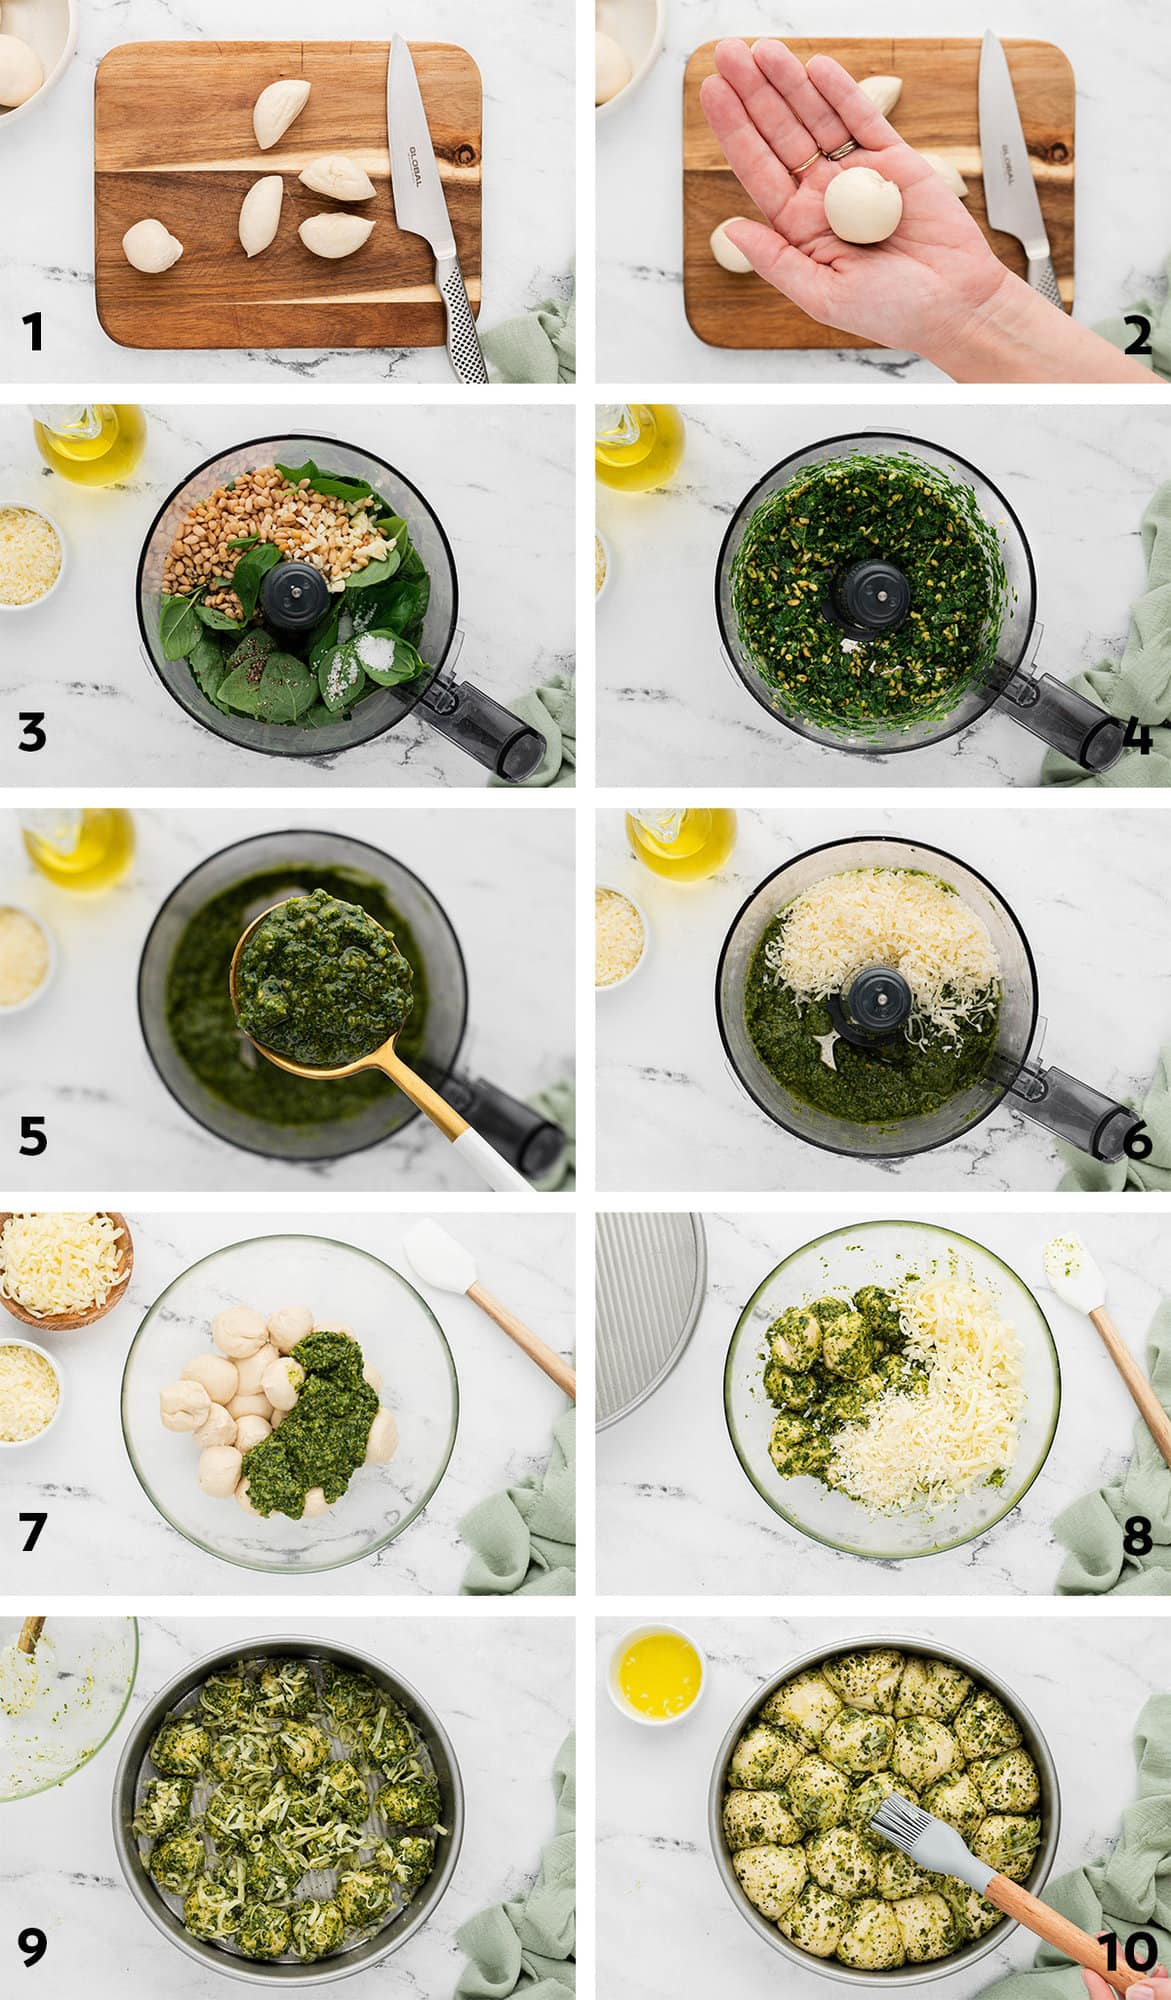 Collage of images showing steps for making pesto and a pull apart.